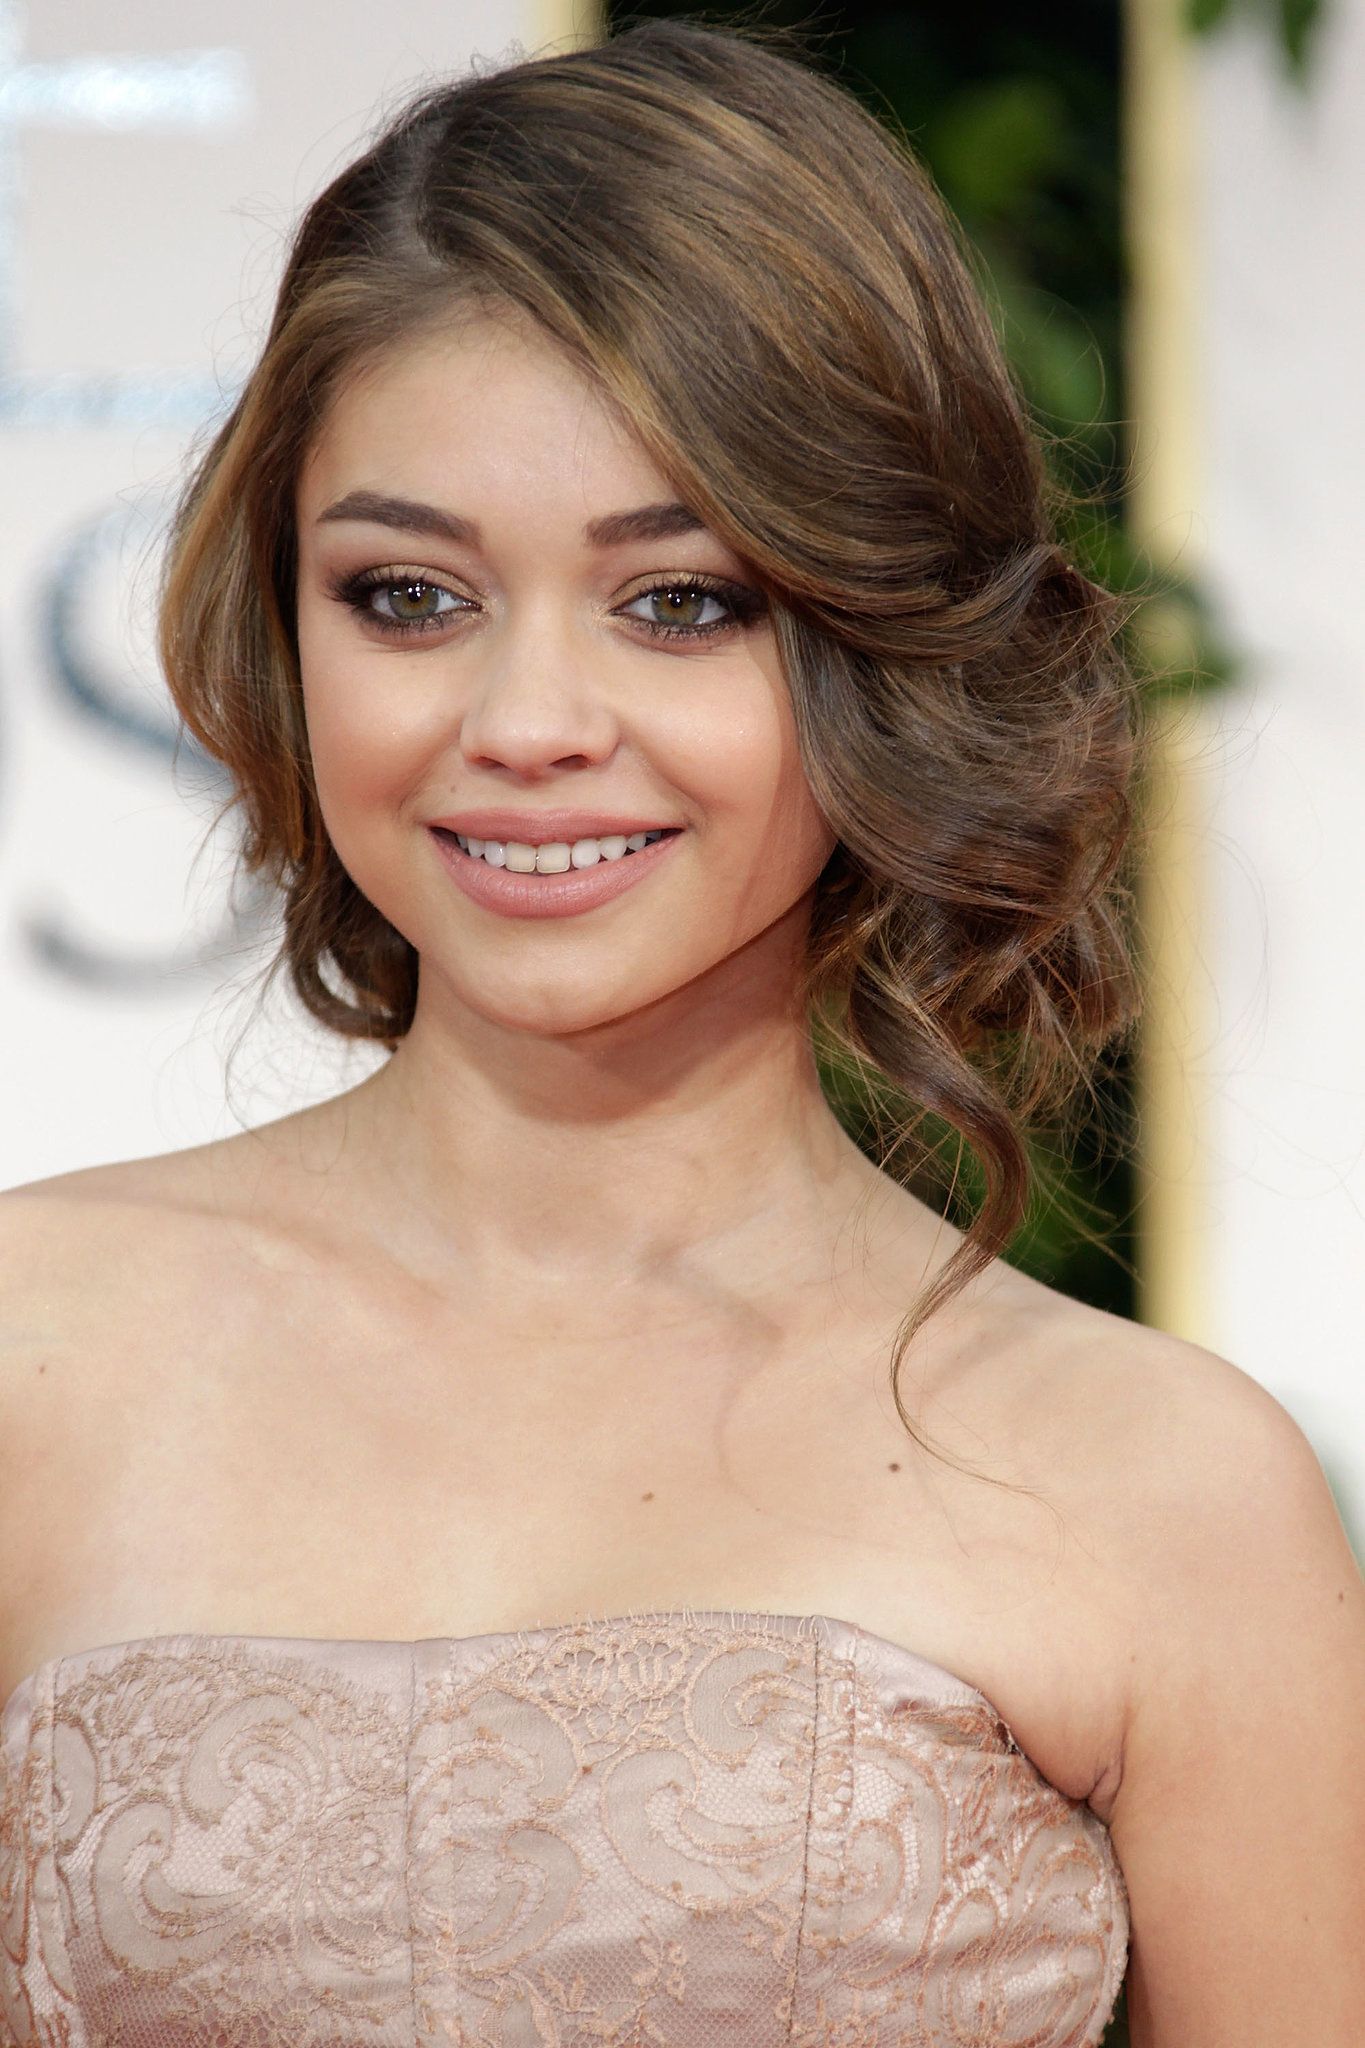 Modern Familys Sarah Hyland went with a low, undone style with swags of curls draped in the front at the 2012 Golden